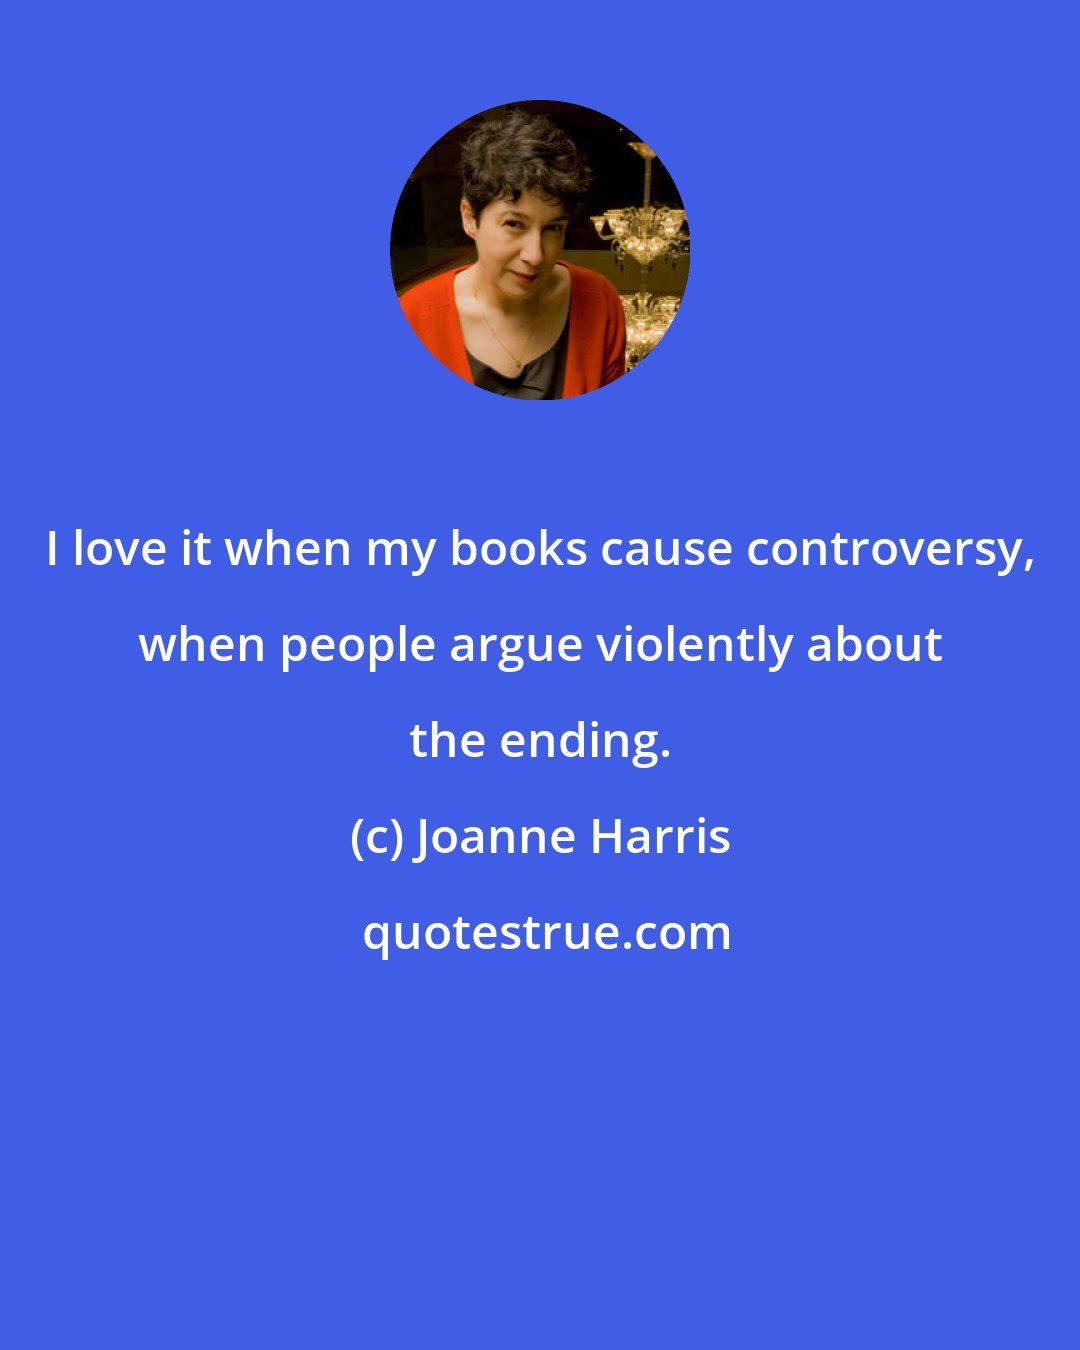 Joanne Harris: I love it when my books cause controversy, when people argue violently about the ending.